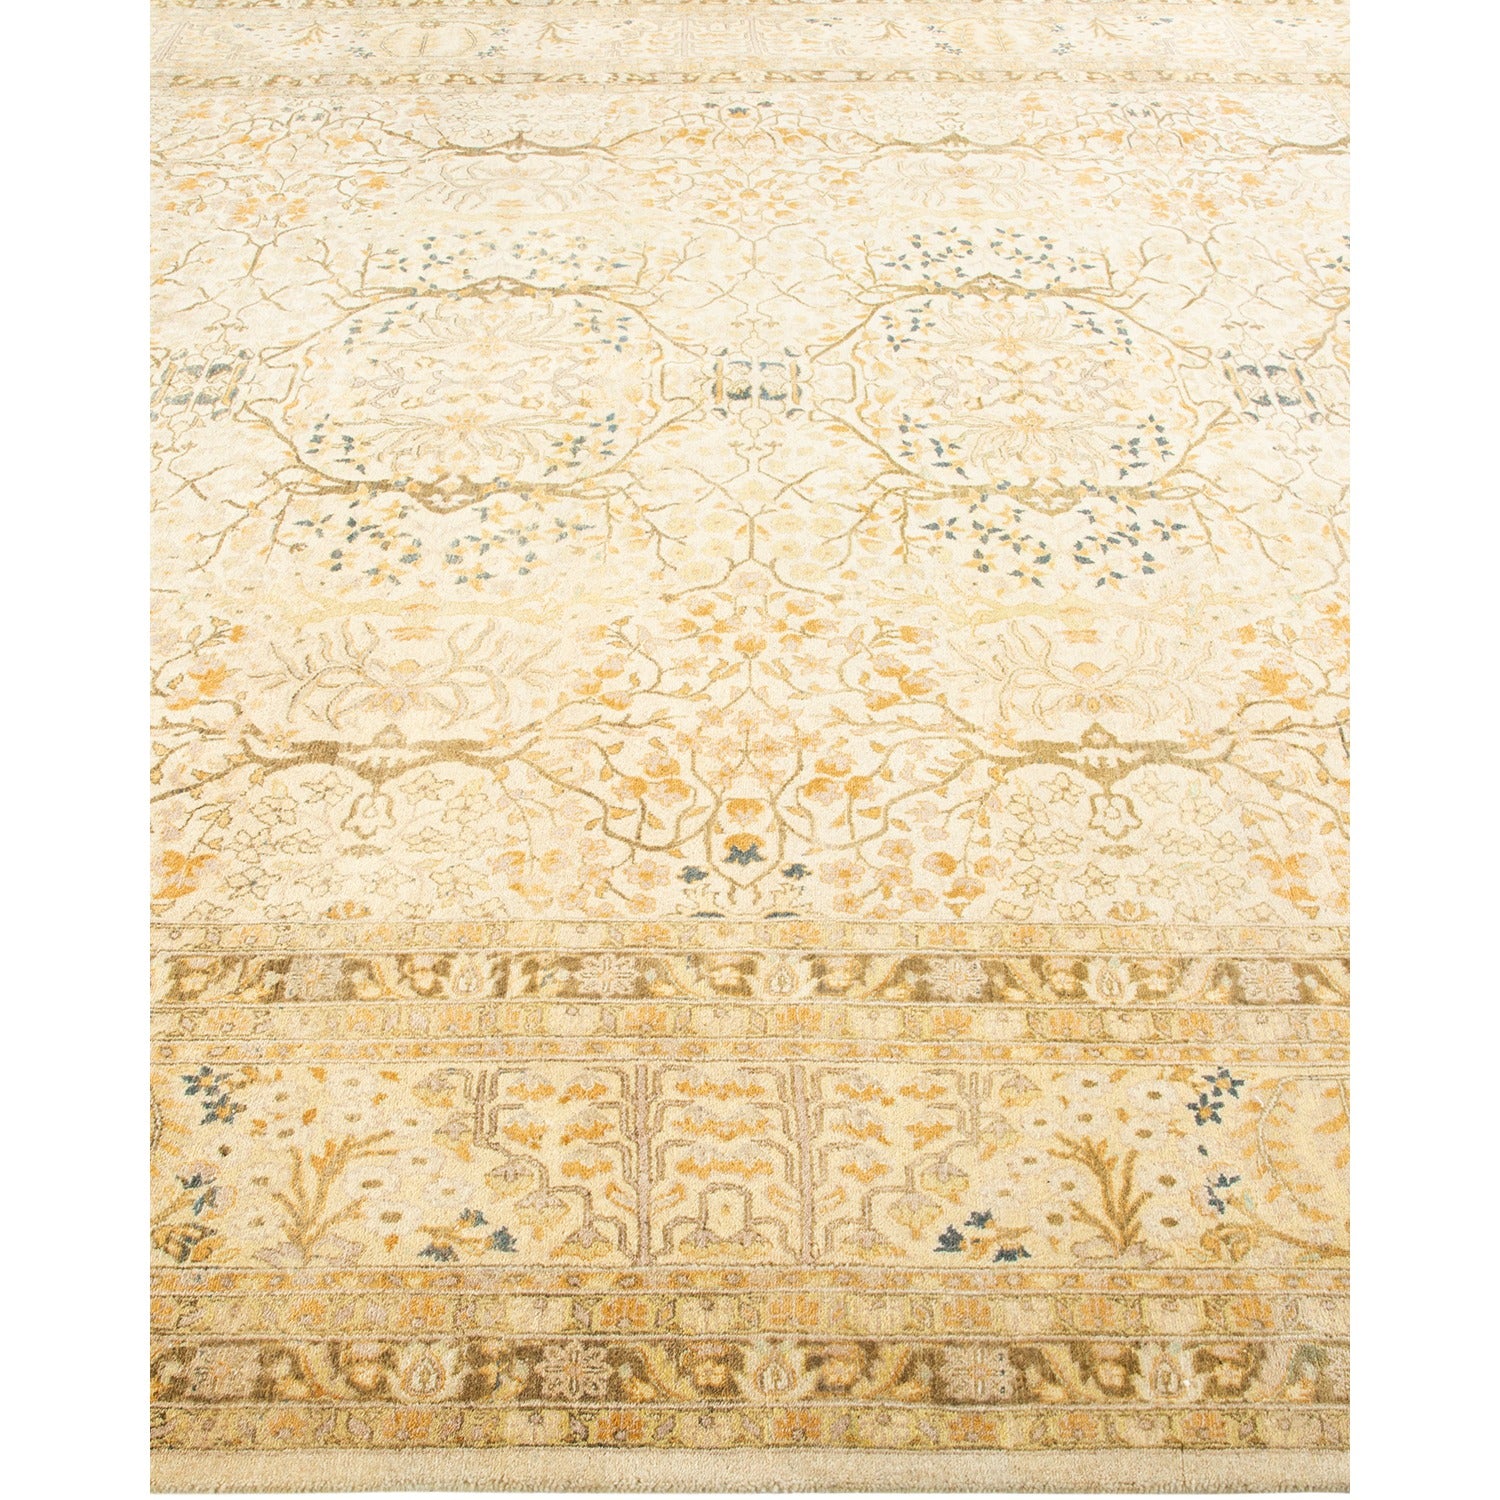 Exquisite traditional rug boasts intricate floral and geometric patterns.